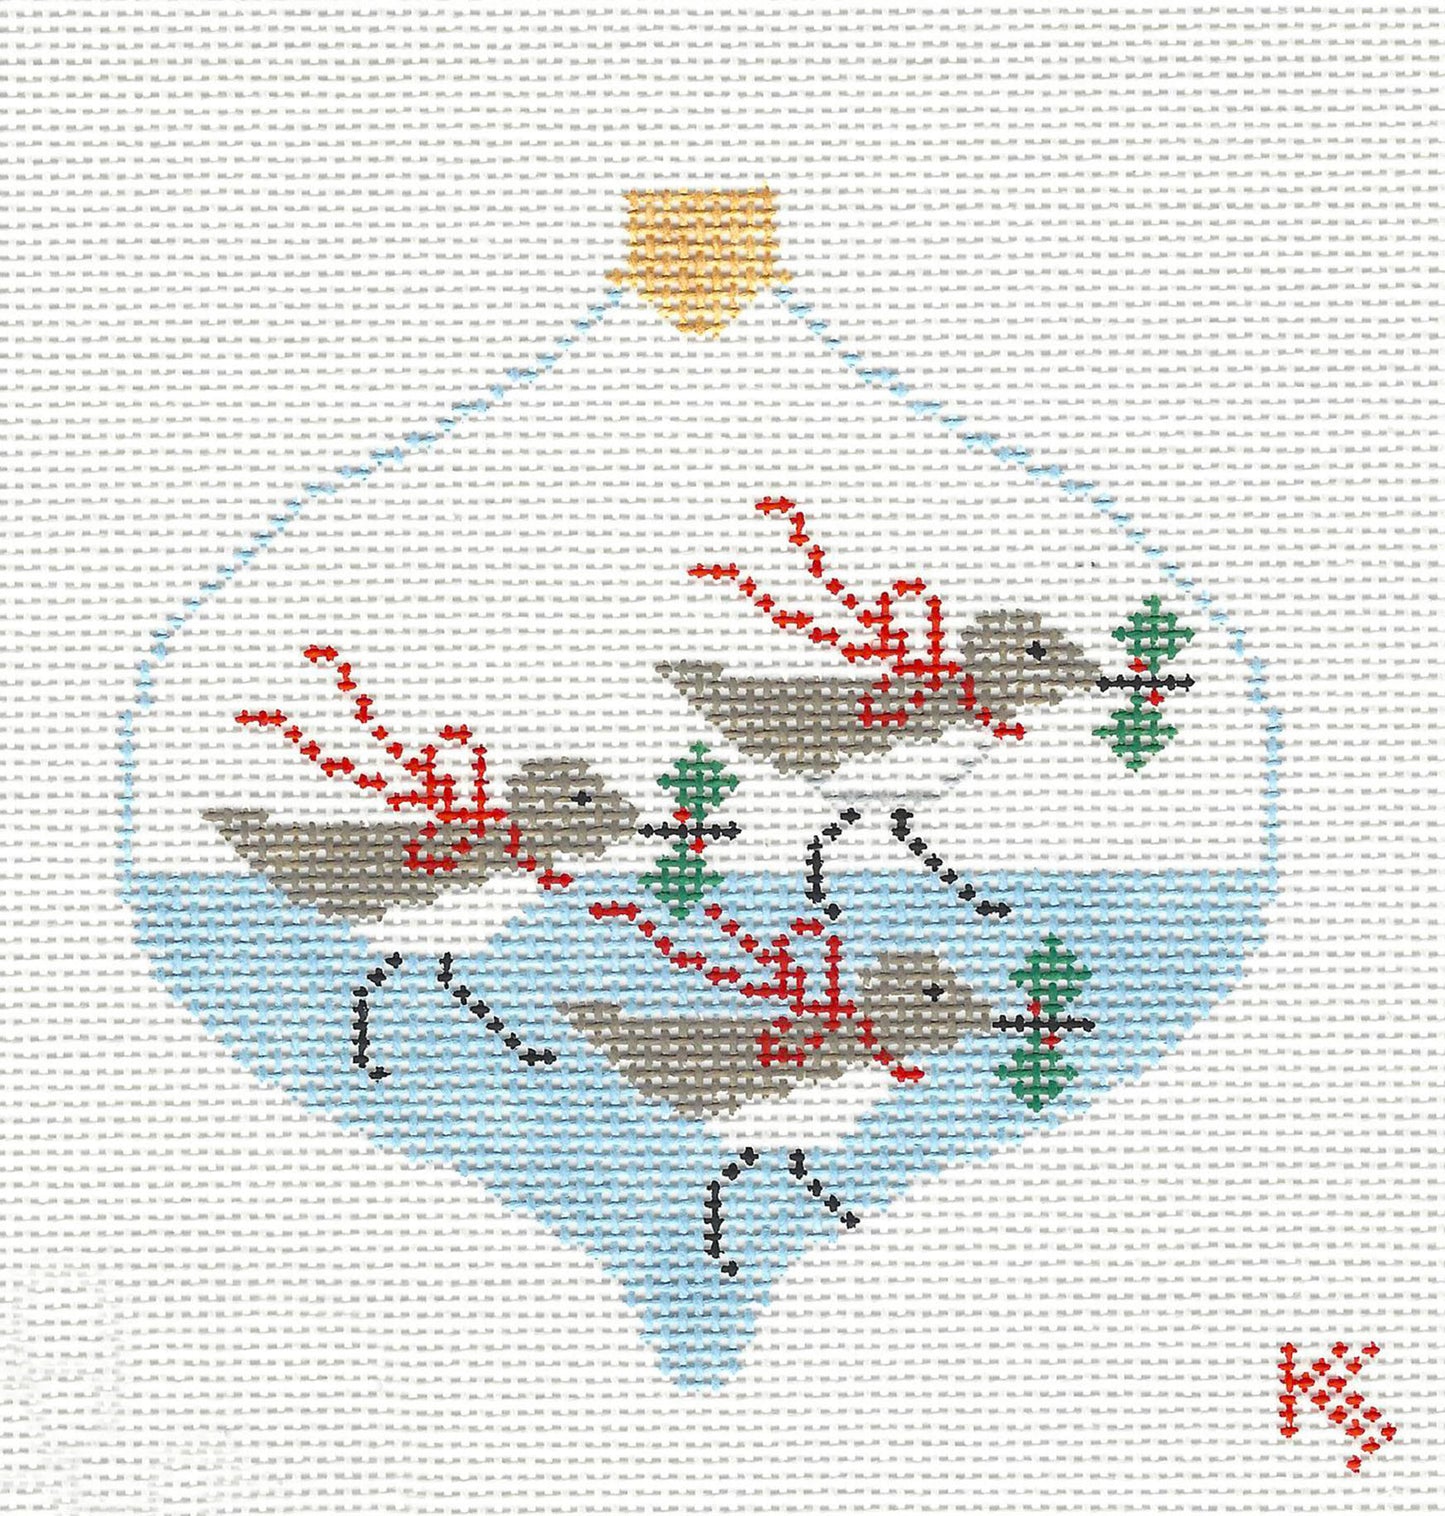 Bauble ~ 3 Christmas Sandpipers with Holly Bauble handpainted Needlepoint Canvas by Kathy Schenkel